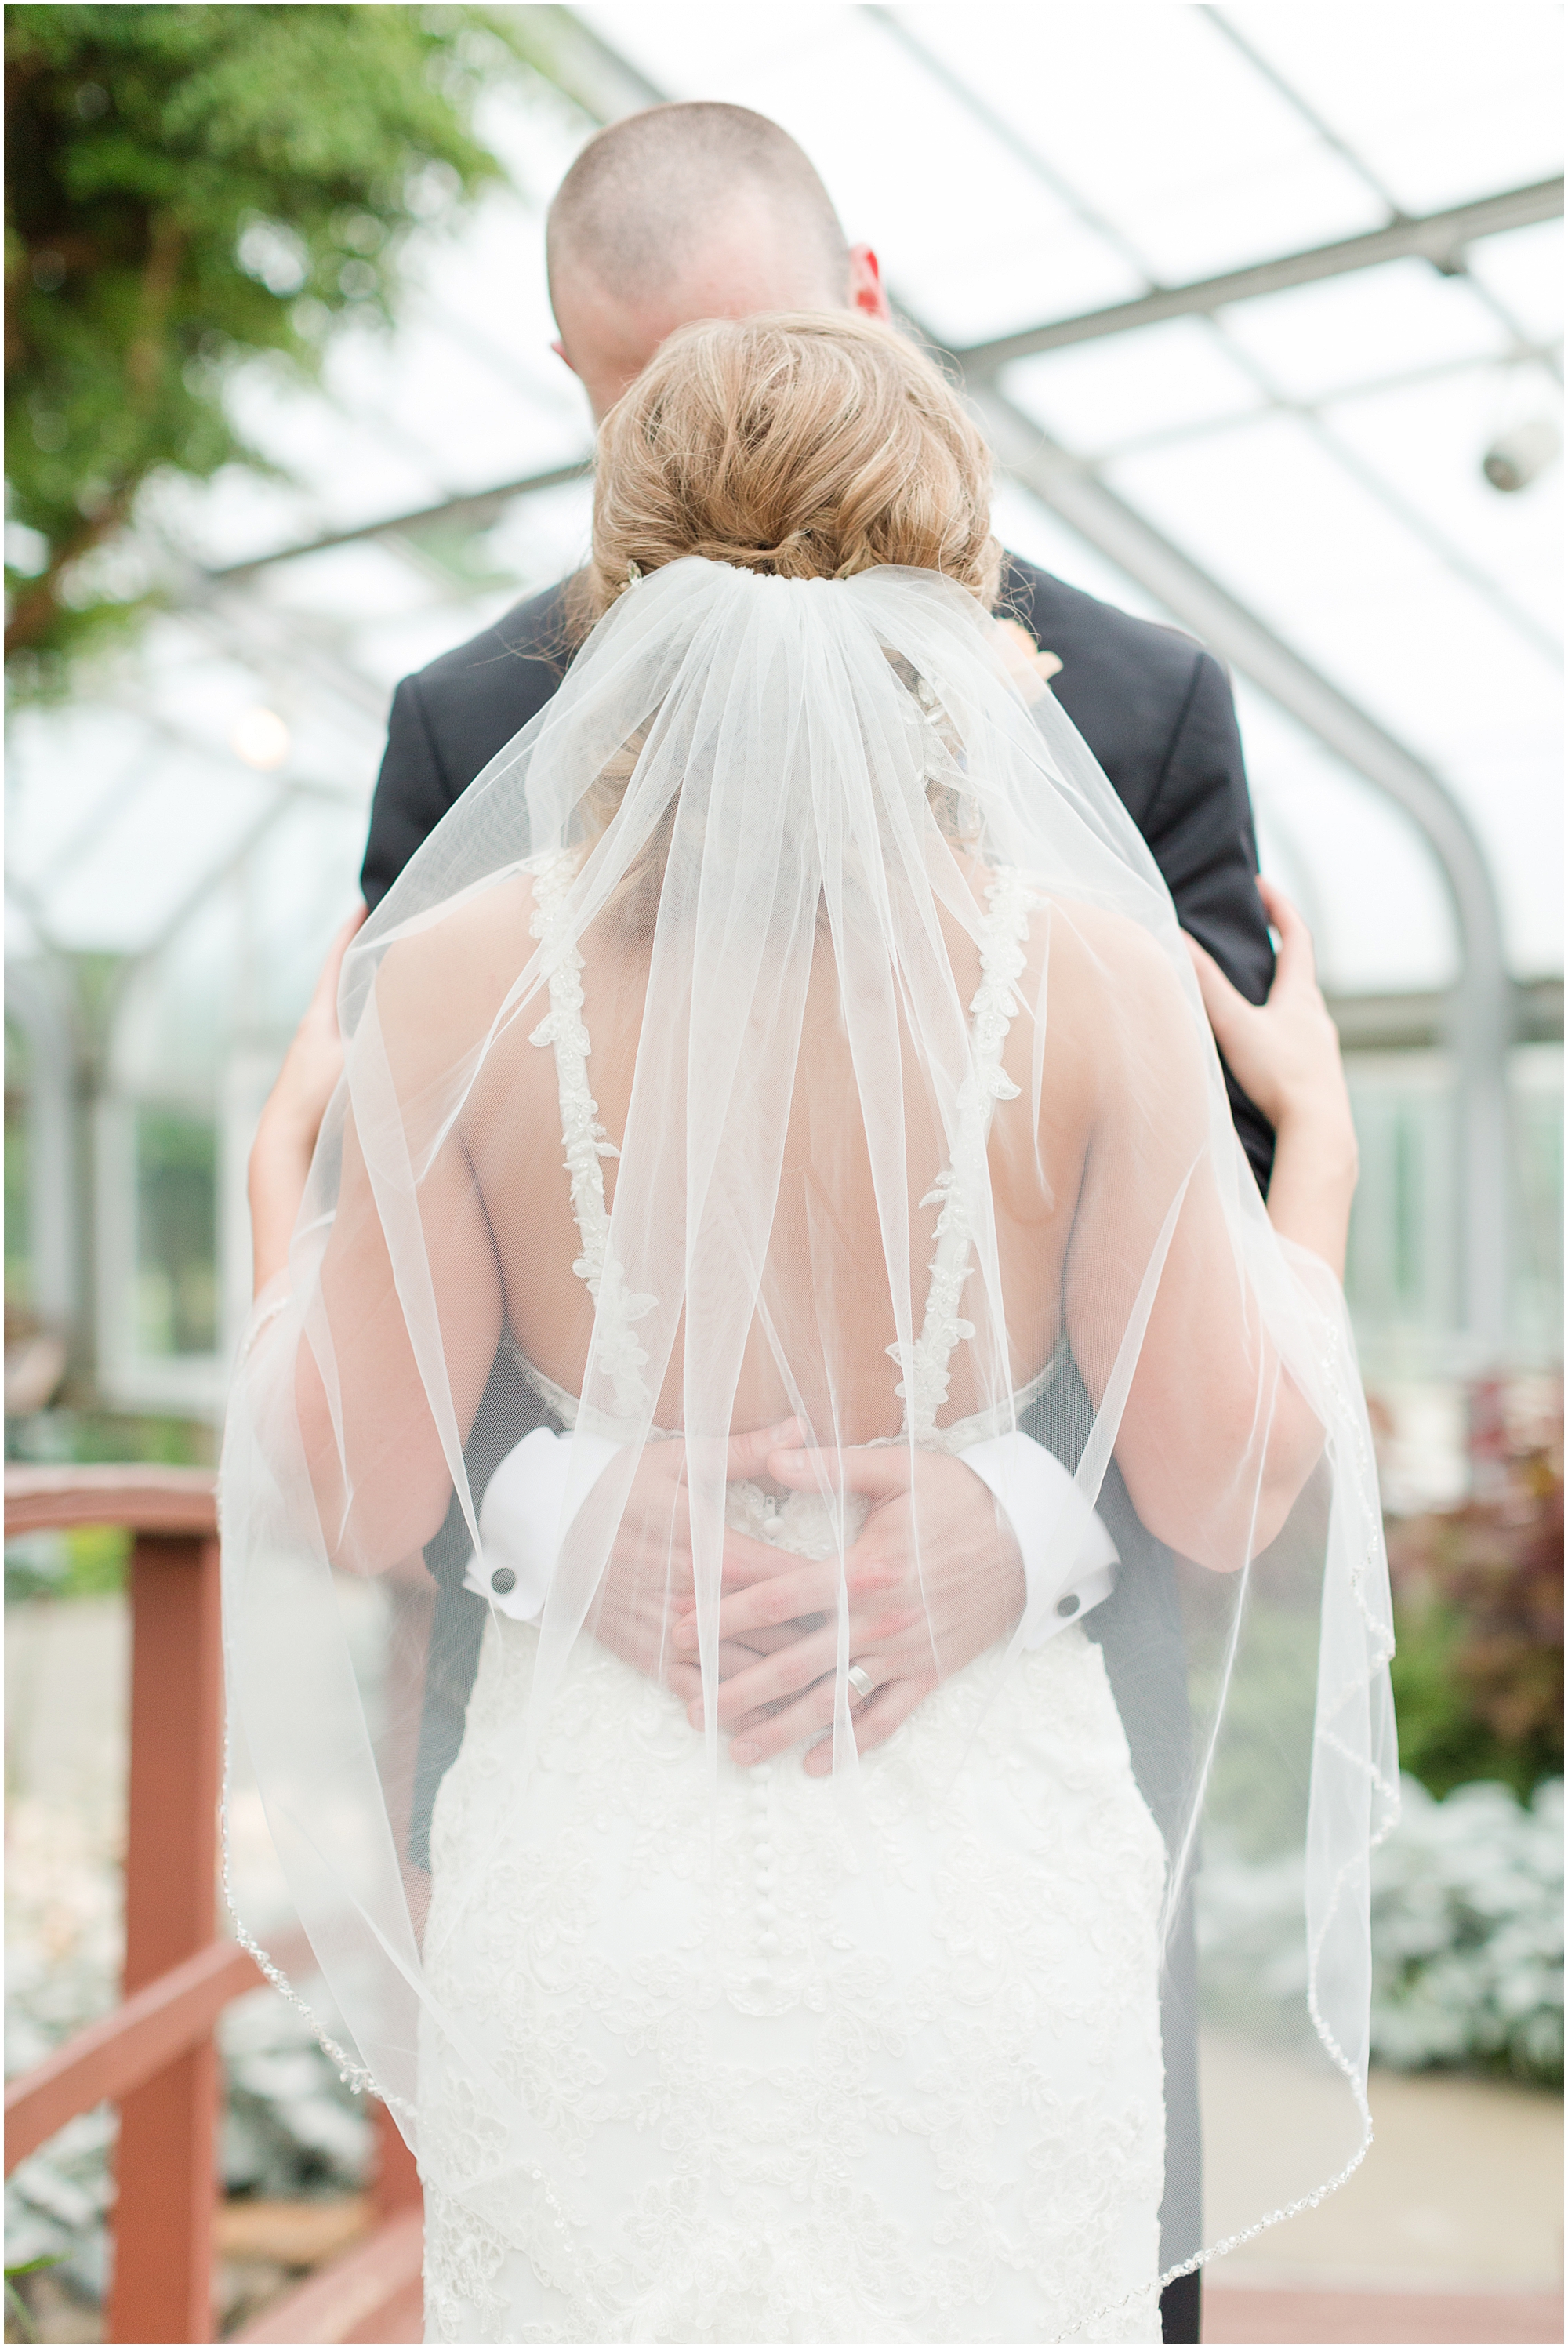 A Stunning Summer Wedding at Bird Haven Greenhouse & Conservatory in Joliet, IL by Rachael Watson Photography